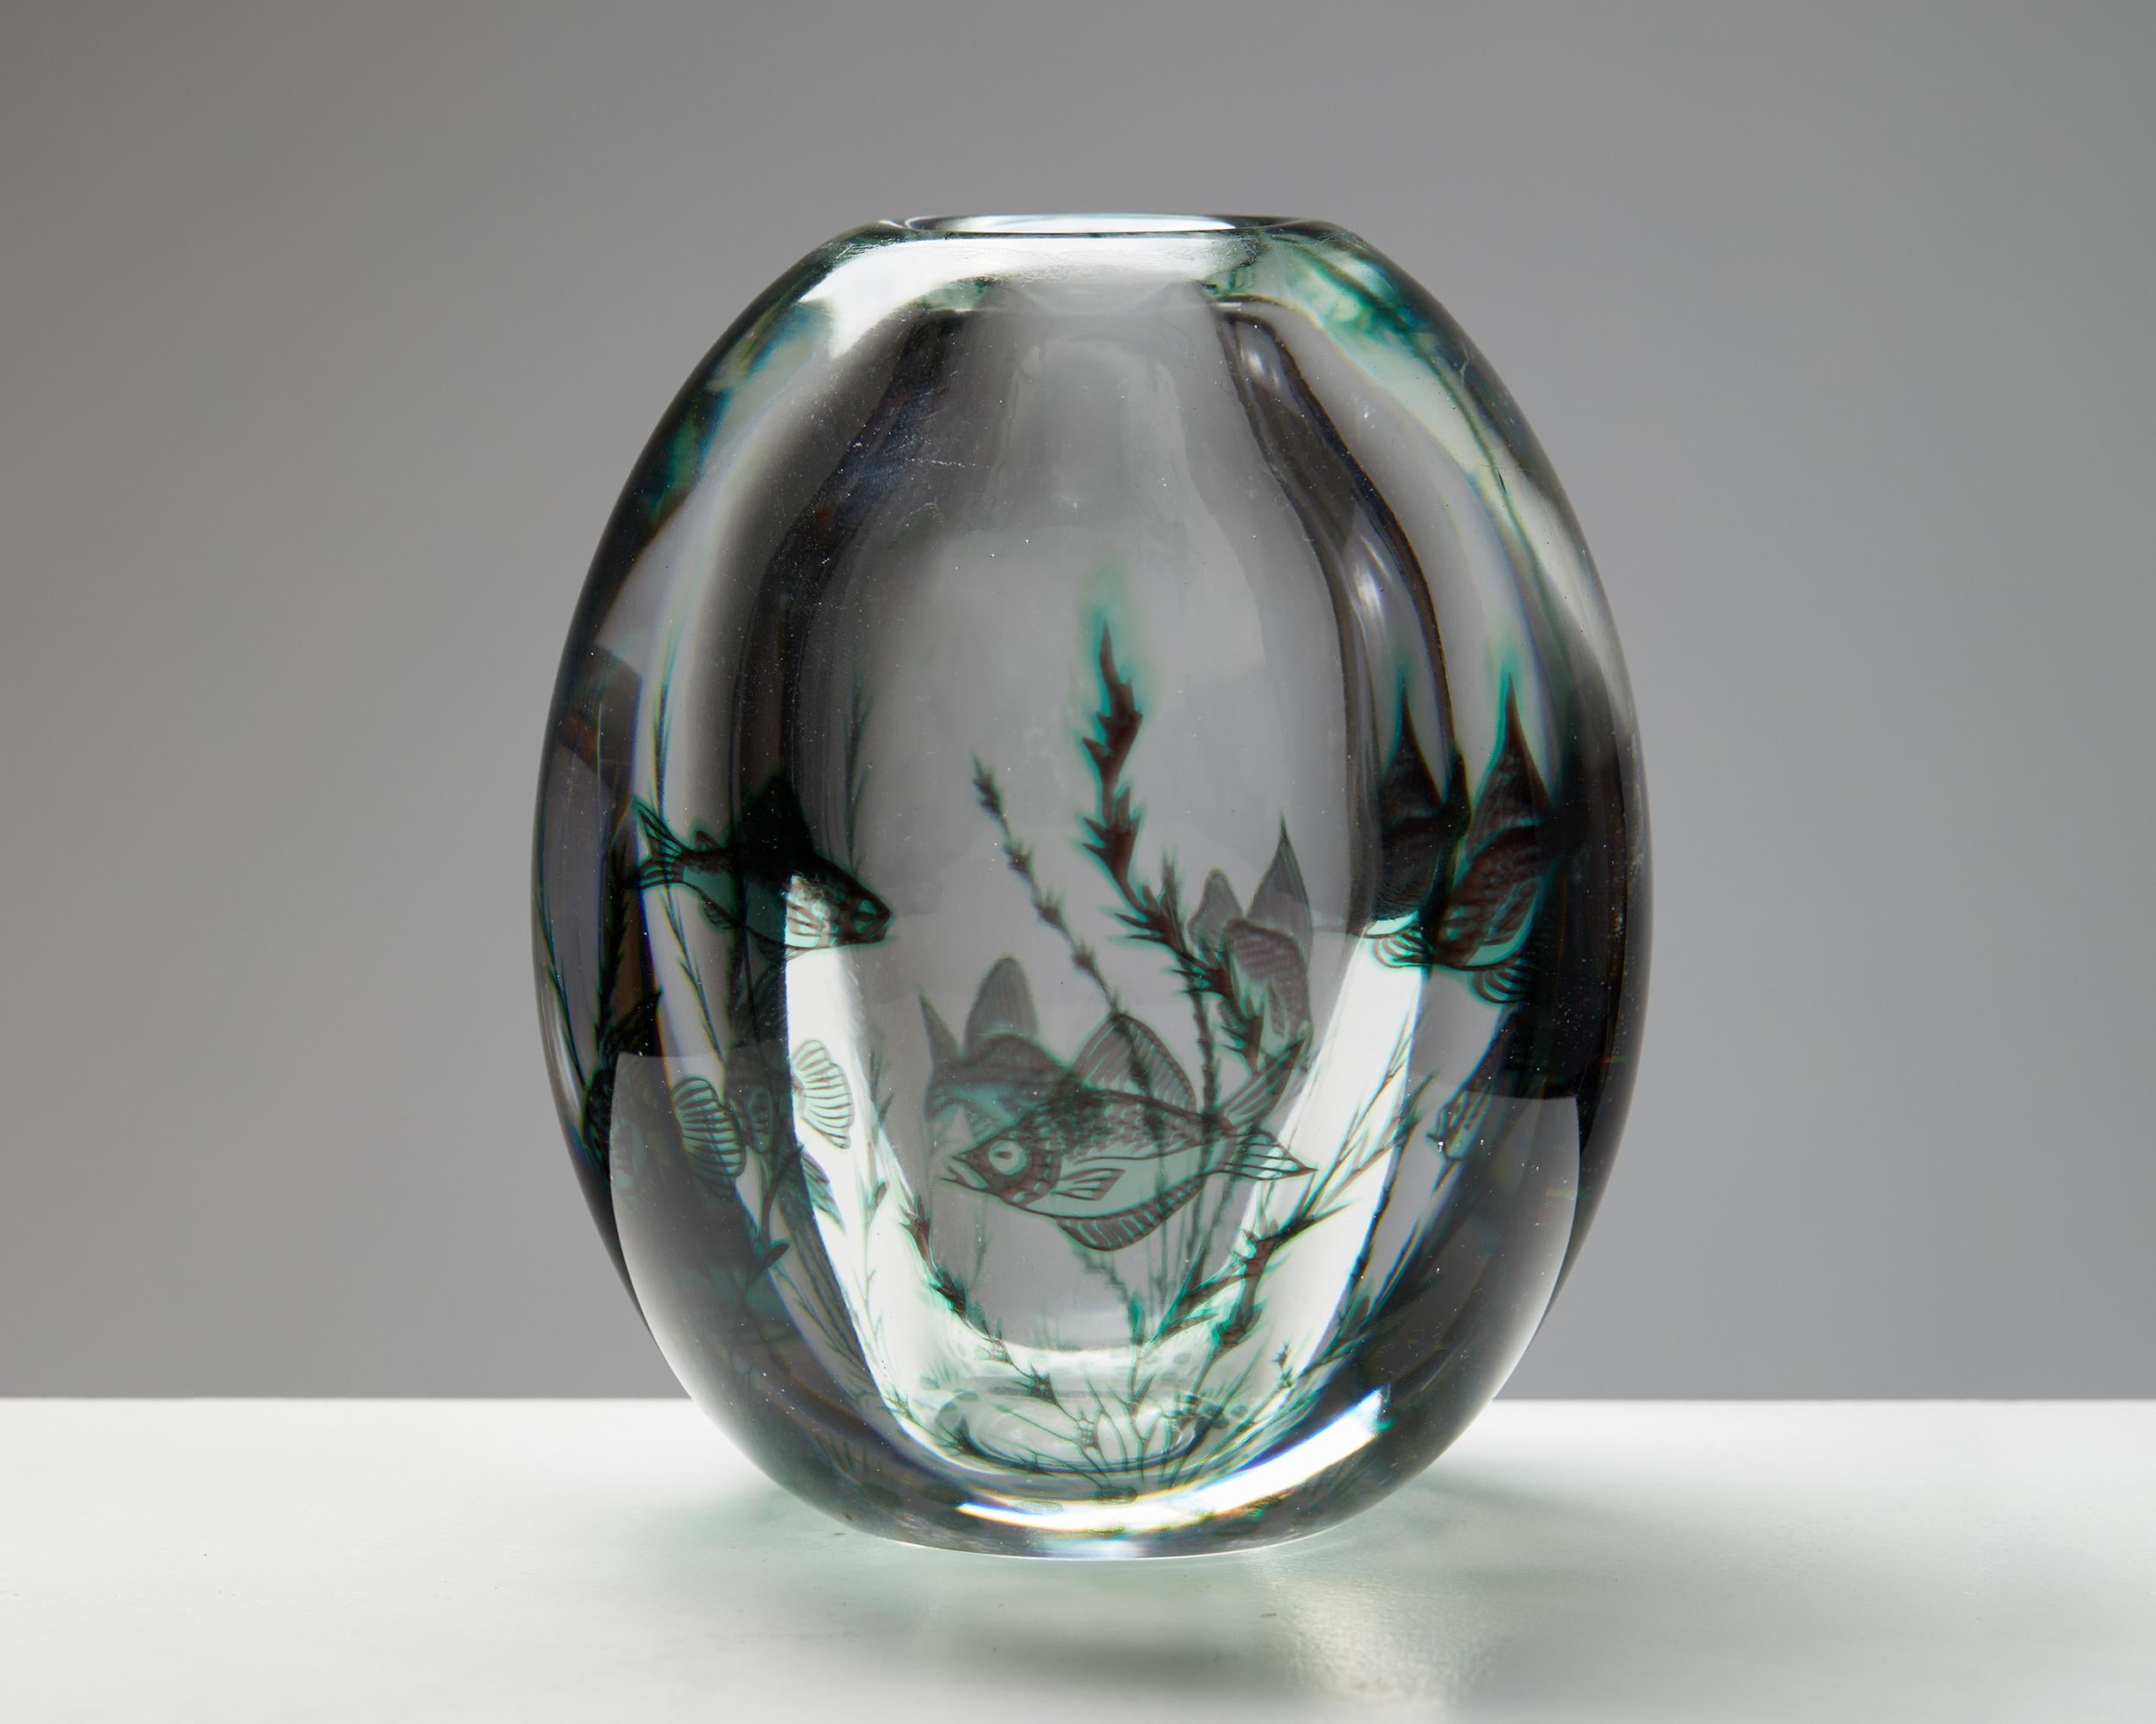 Vase designed by Edward Hald for Orrefors,
Sweden. 1940s.

Glass.

Signed.

Edward Hald (1883 – 1980) is one of the well-known Swedish glass artists who have worked for Orrefors. After studying in Leipzig, he completed his artistic training with